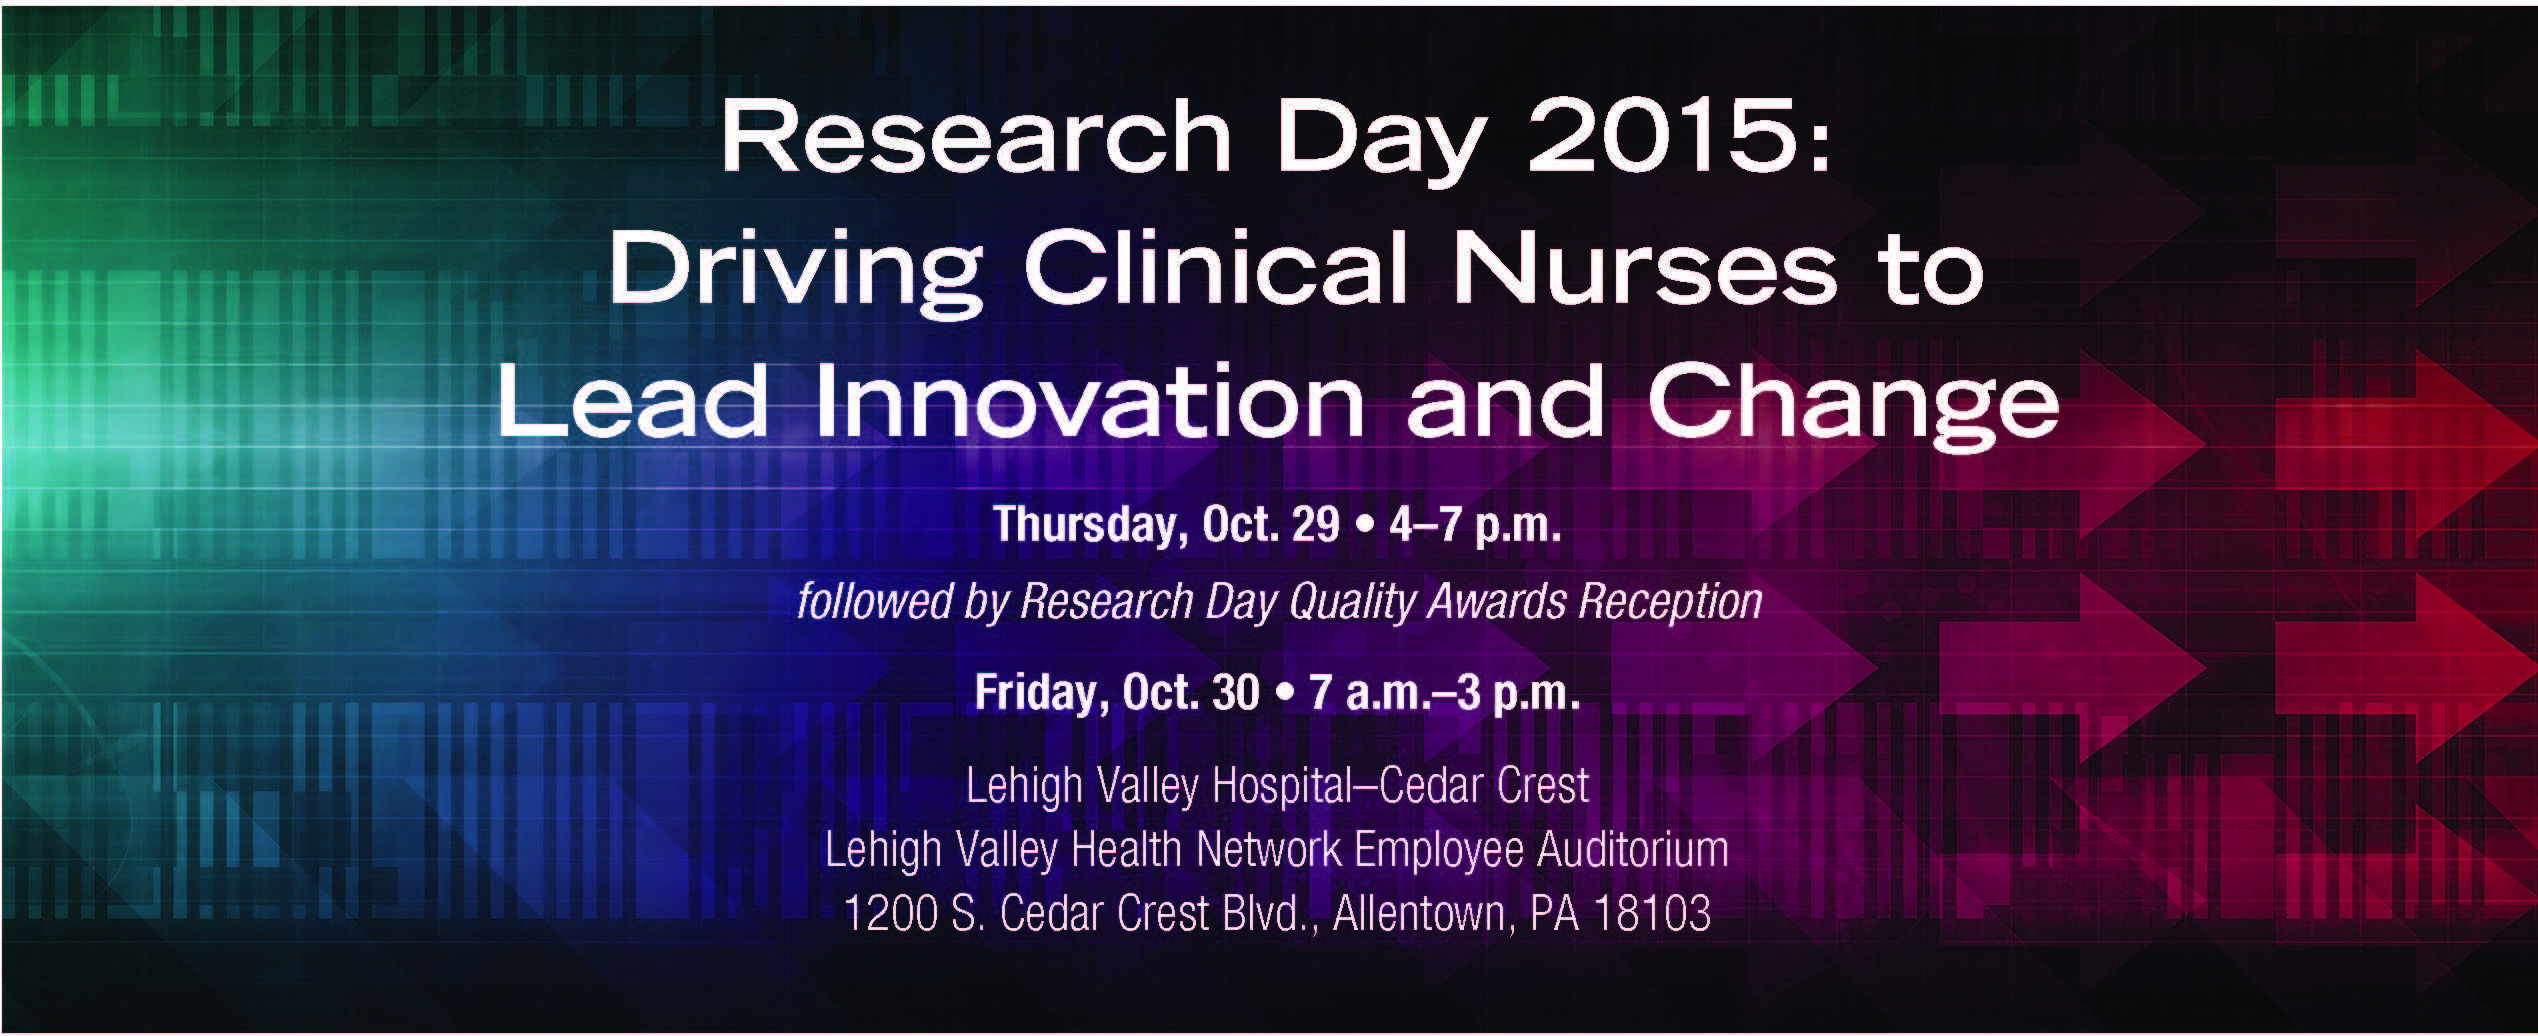 Research Day 2015: Driving Clinical Nurses to Lead Innovation and Change